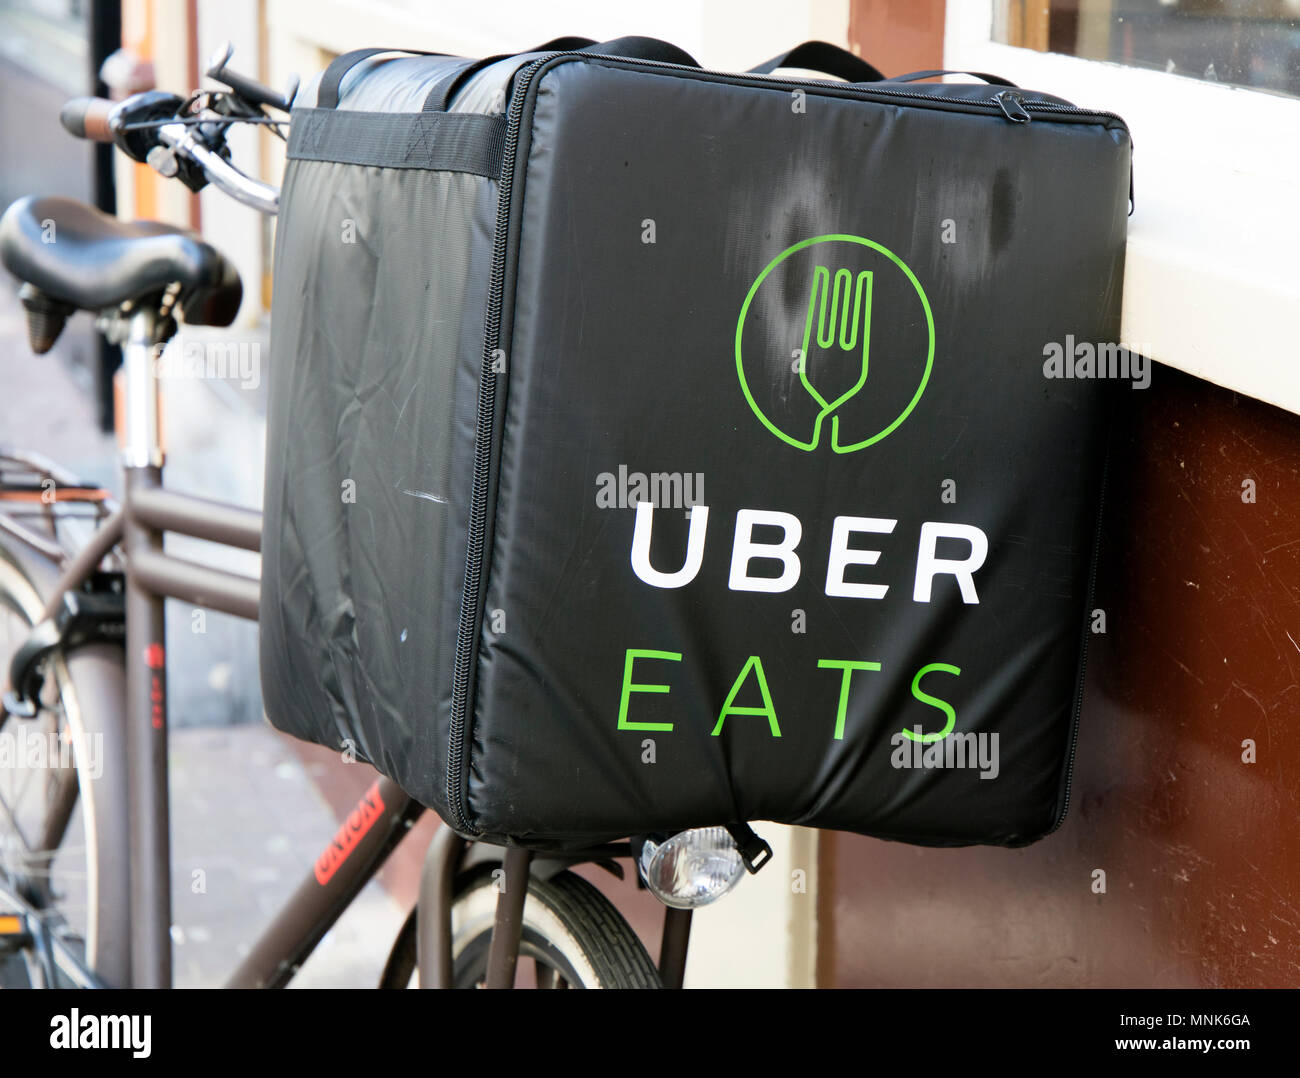 Amsterdam, Netherlands-april 9, 2017: Uber eats bicycle in a street of amsterdam Stock Photo